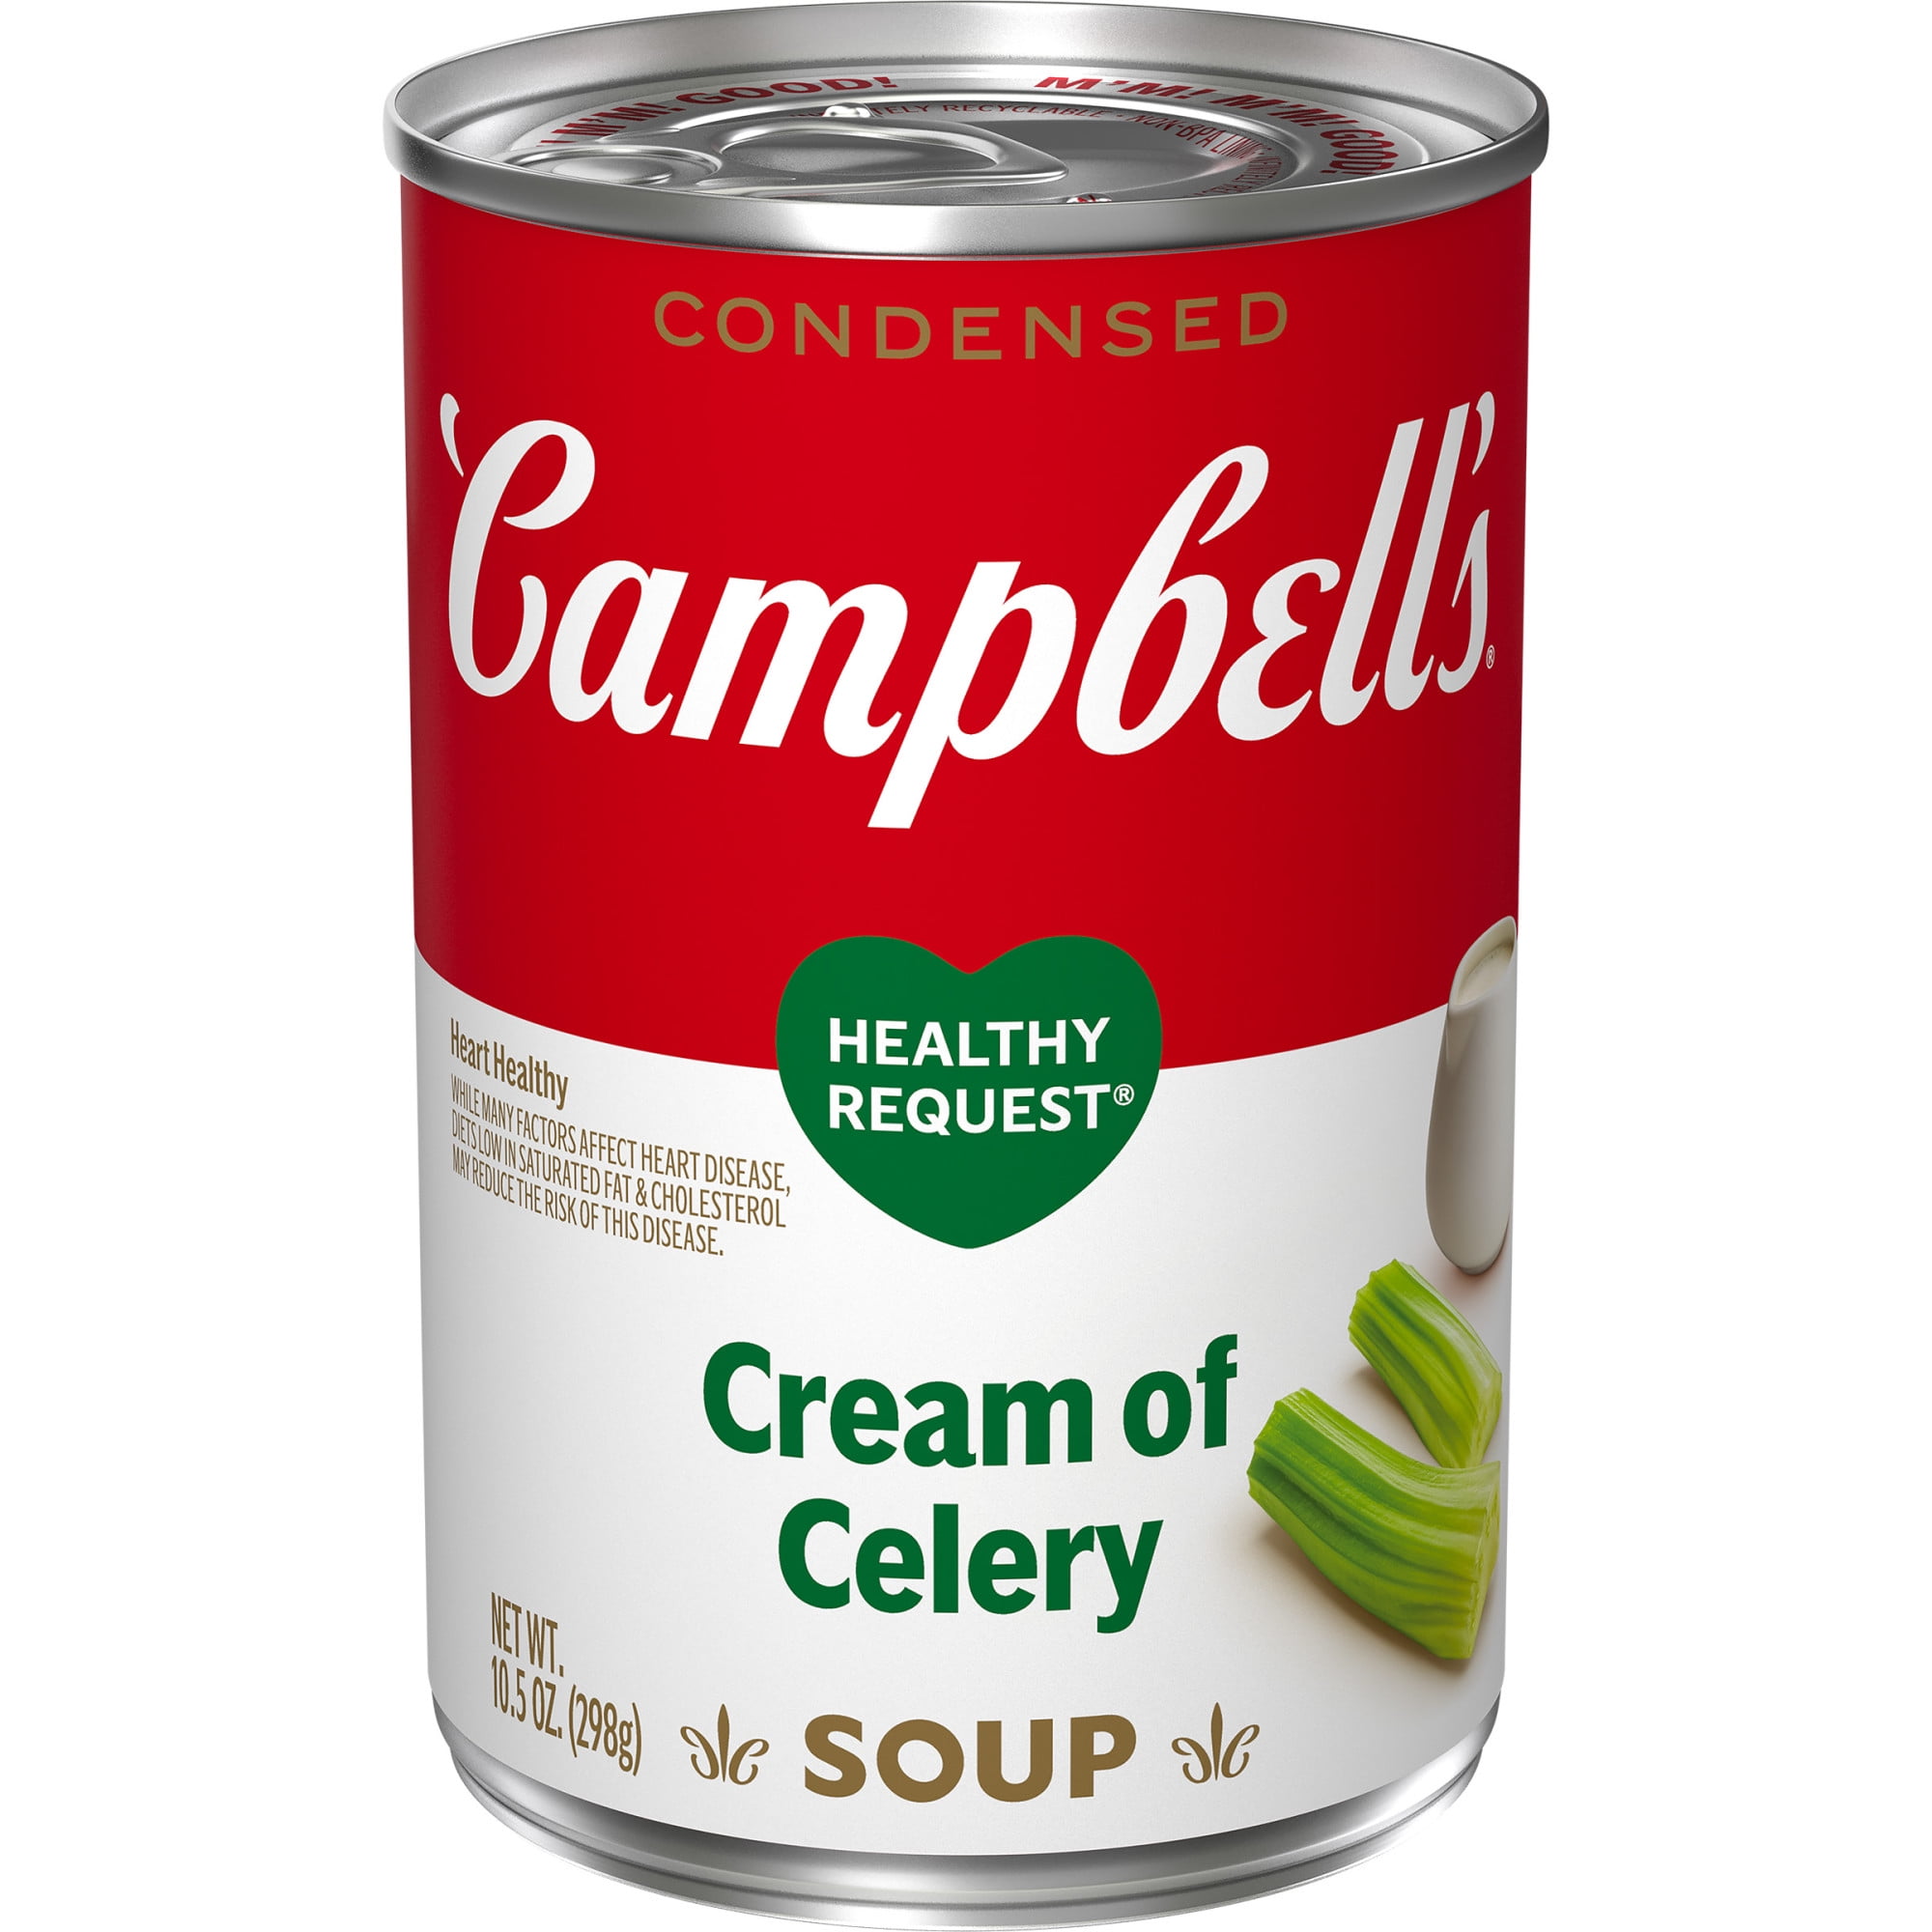 Campbell'sCondensedHealthy RequestCream of Celery Soup, 10.5 Ounce Can